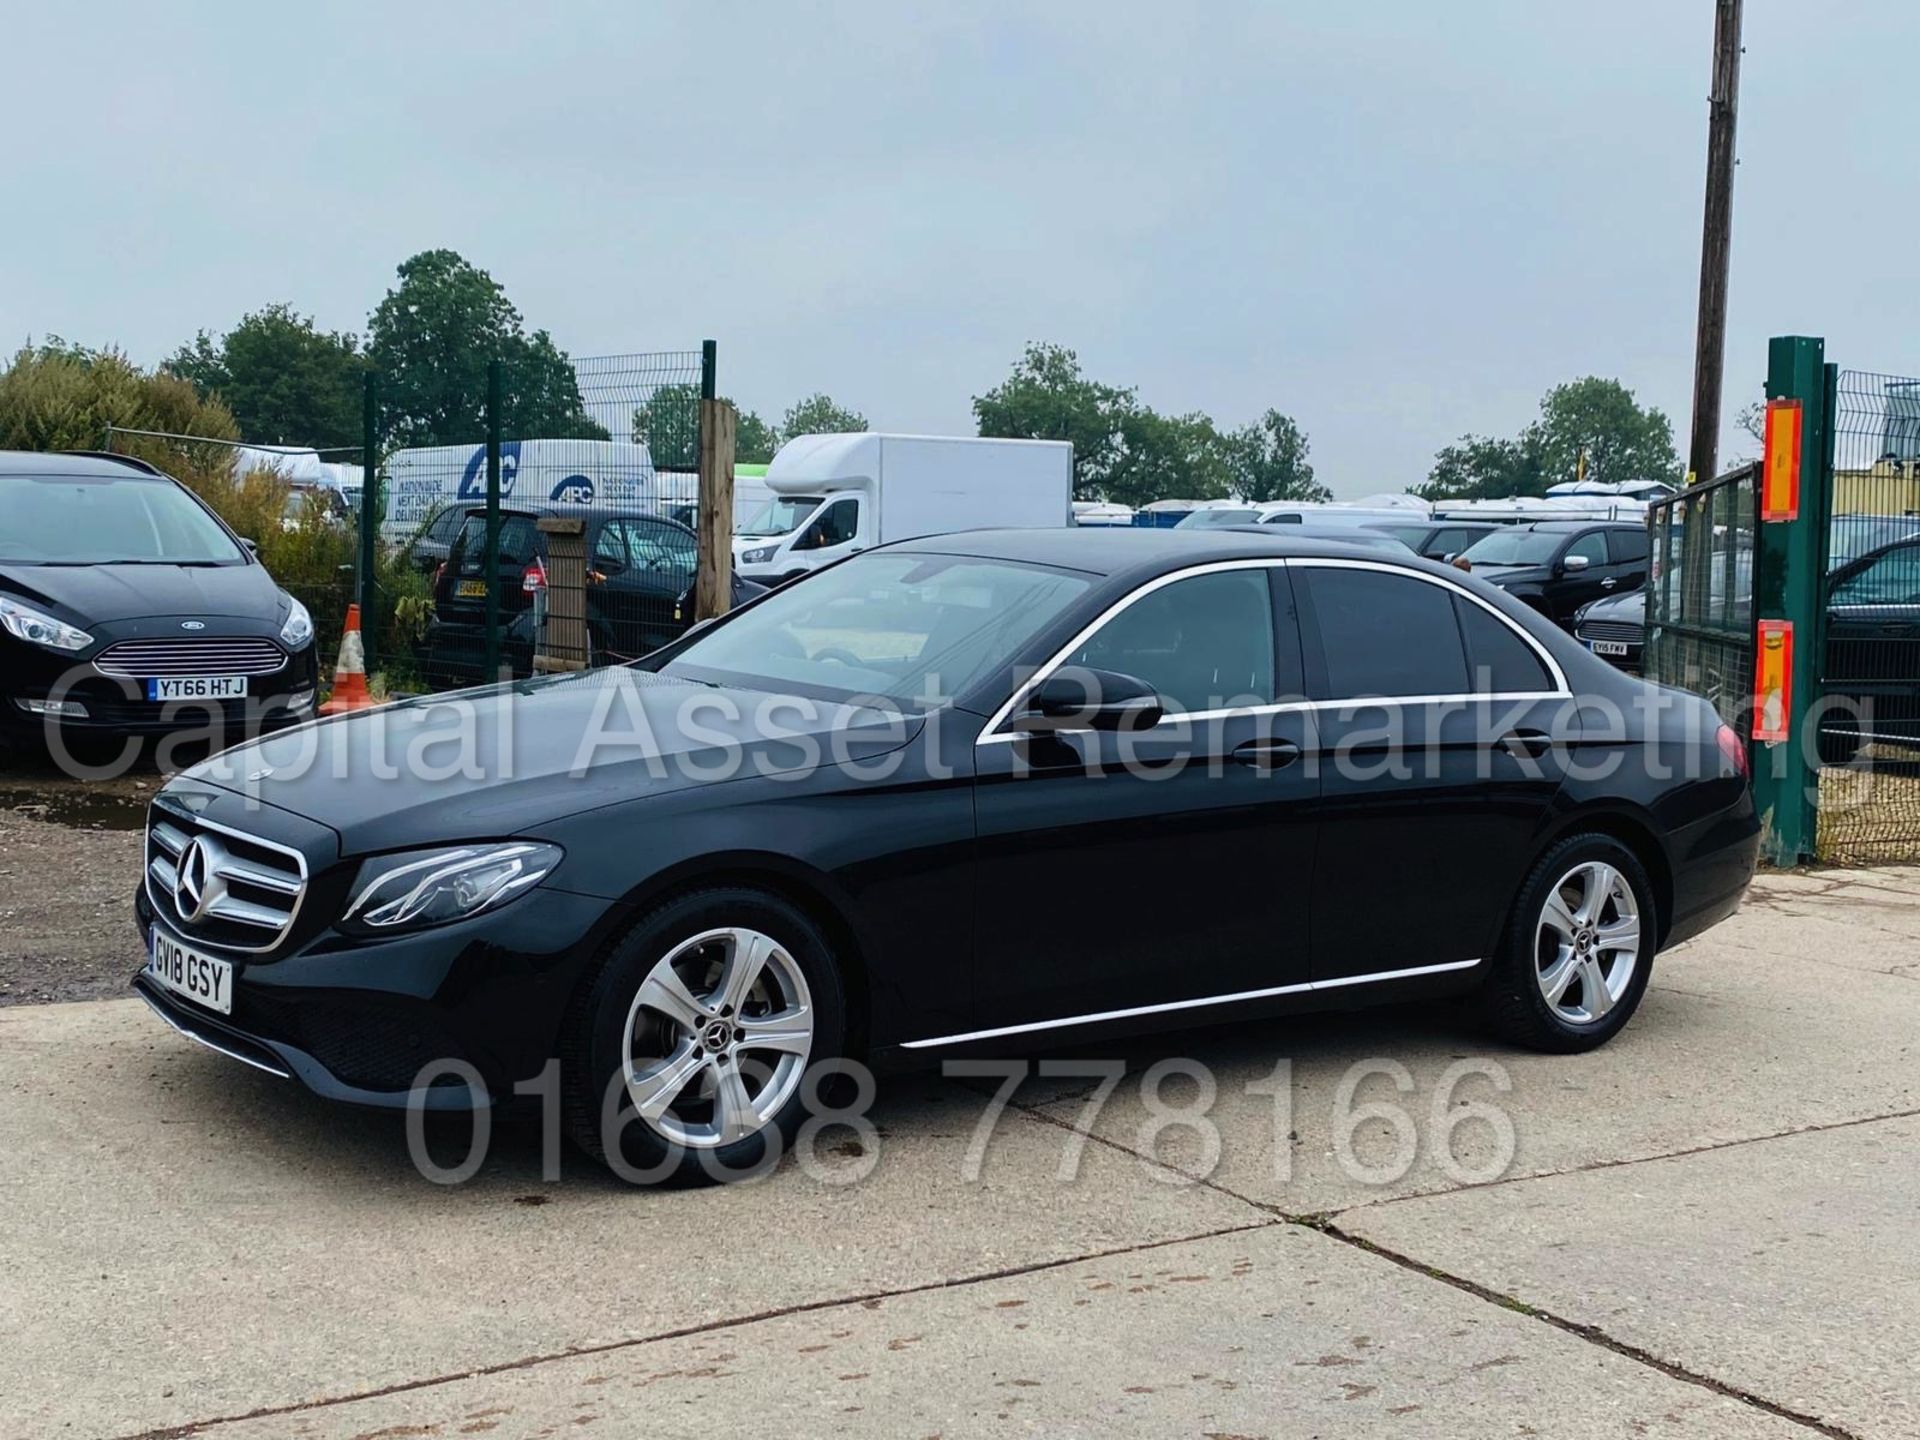 (On Sale) MERCEDES-BENZ E220D *SALOON* (2018 - NEW MODEL) '9-G TRONIC AUTO - LEATHER - SAT NAV' - Image 6 of 52